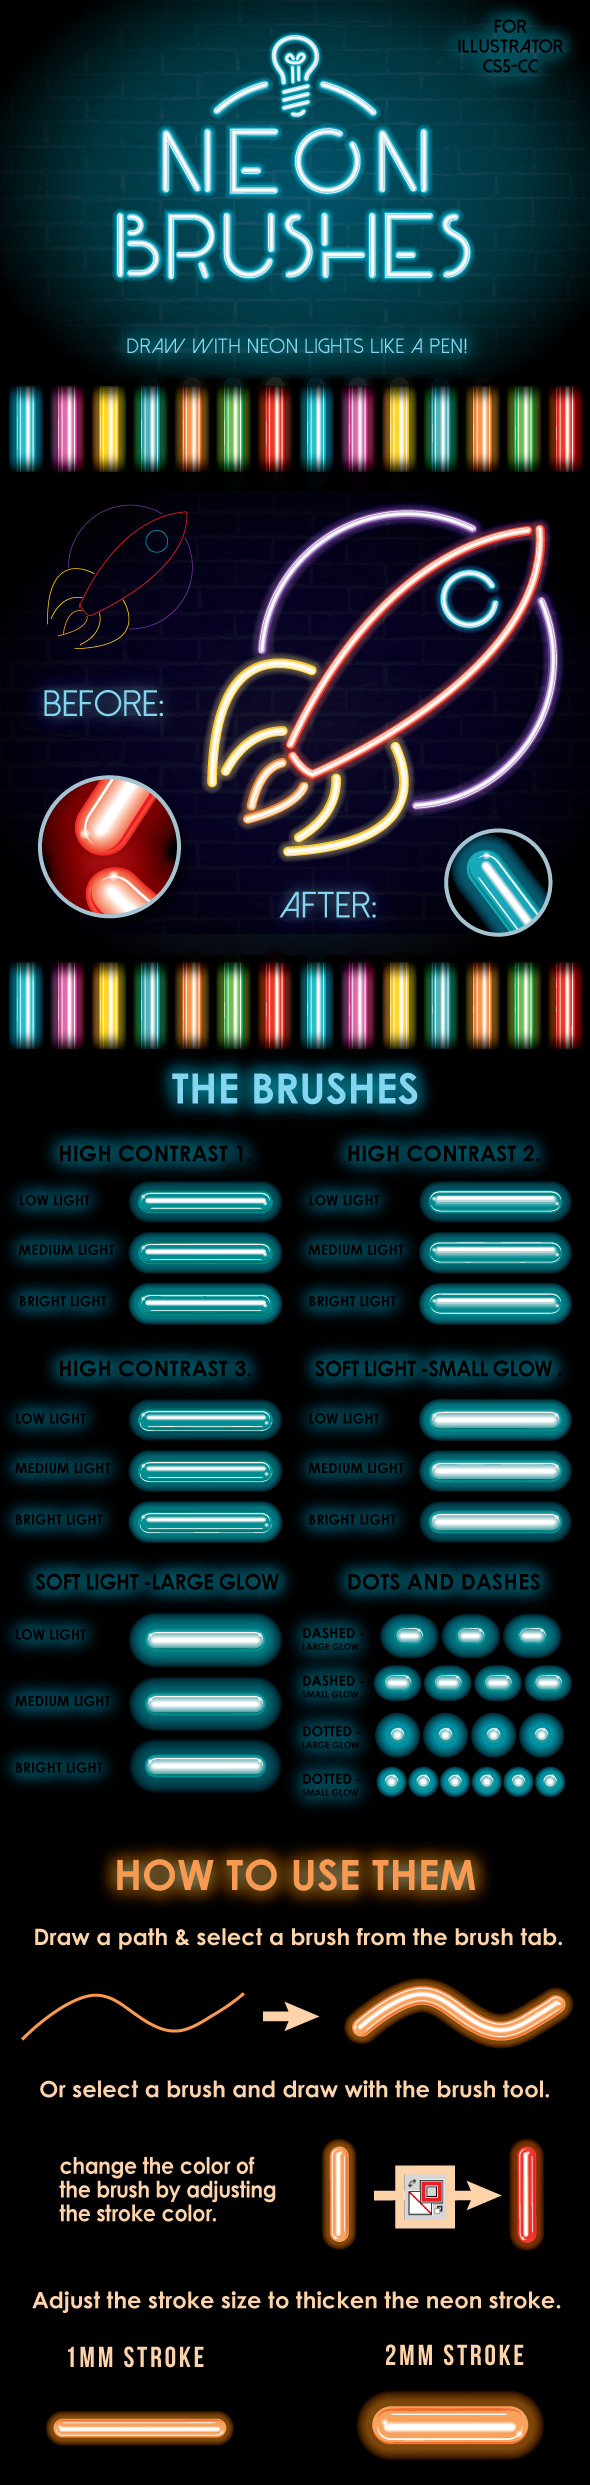 Neon Brushes by JRChild | GraphicRiver